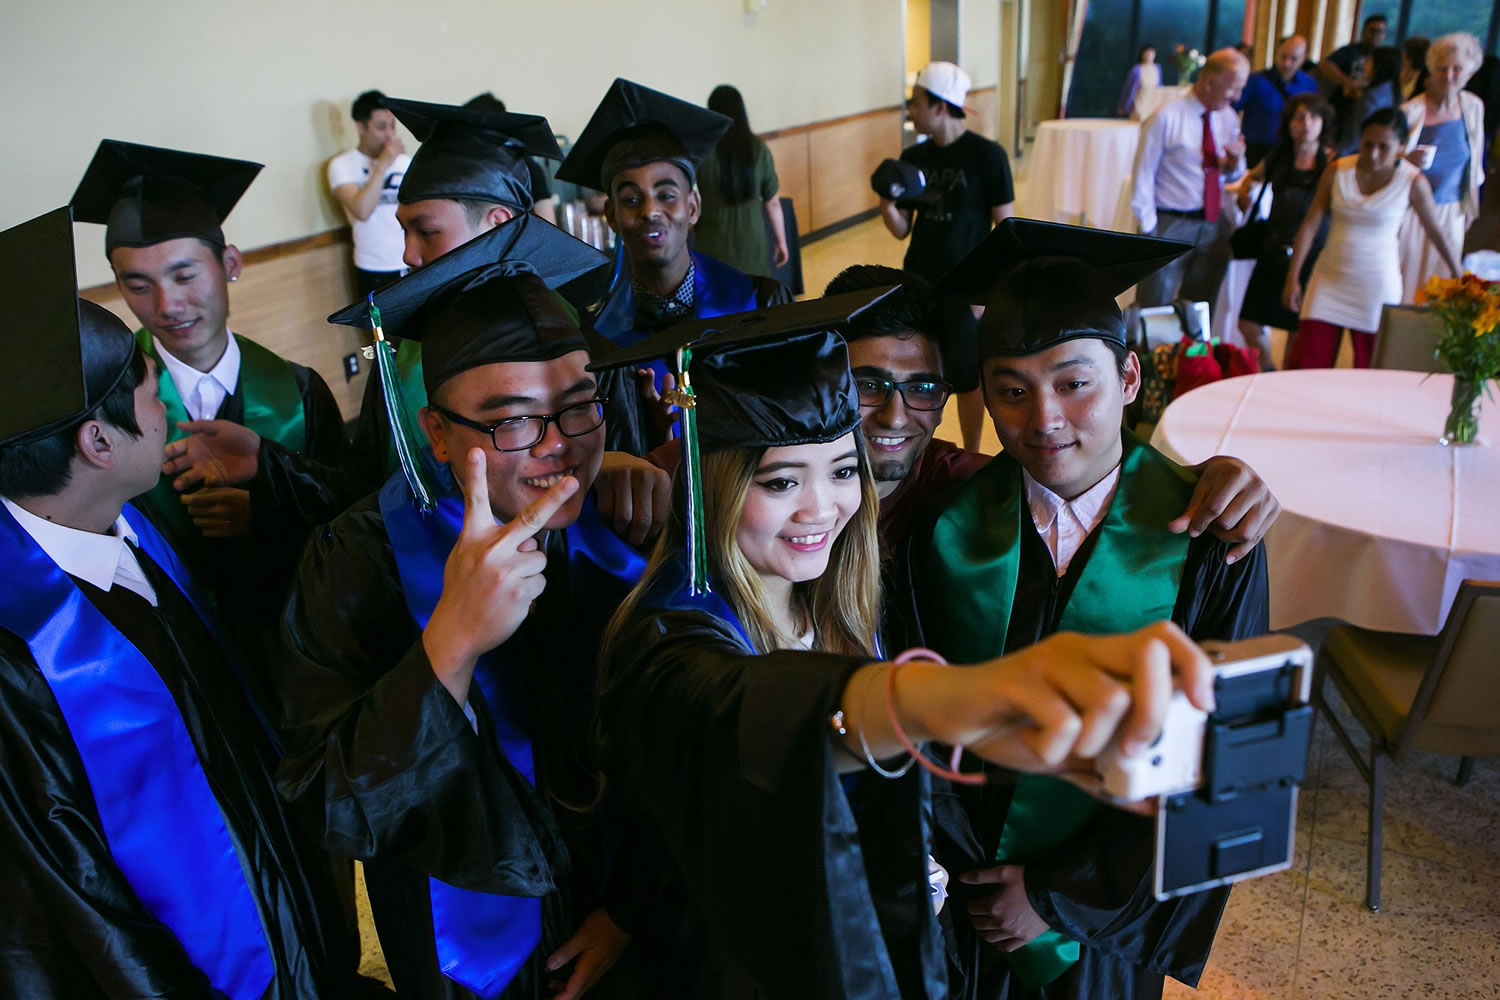 Xue Ying Yu takes a photo with fellow graduates of the Seattle World School at their commencement last week.